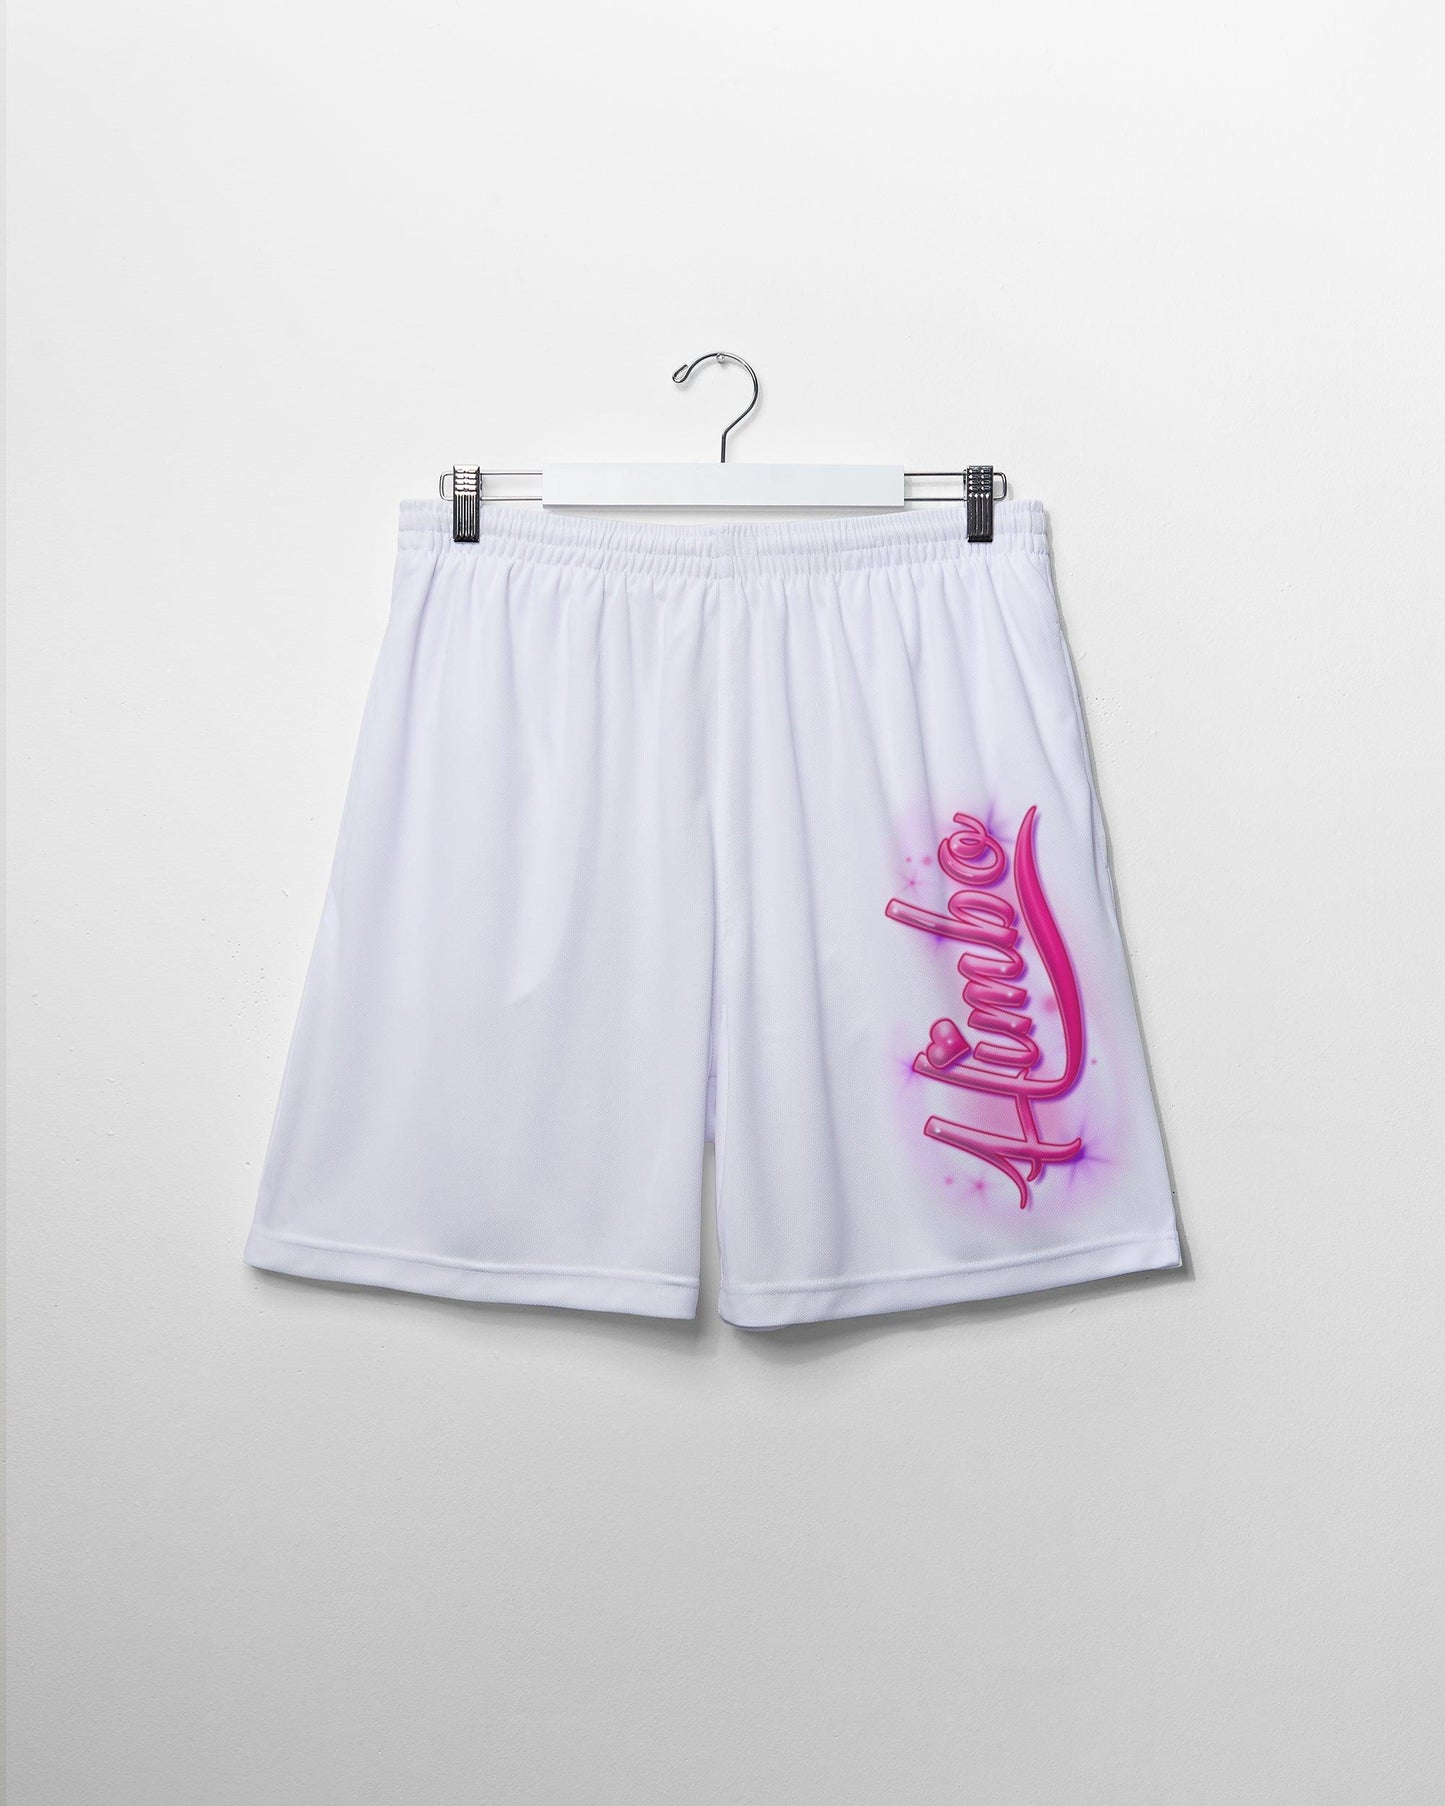 Double Pack - spray paint himbo - tank and basket ball shorts - Full outfit. - HOMOLONDON